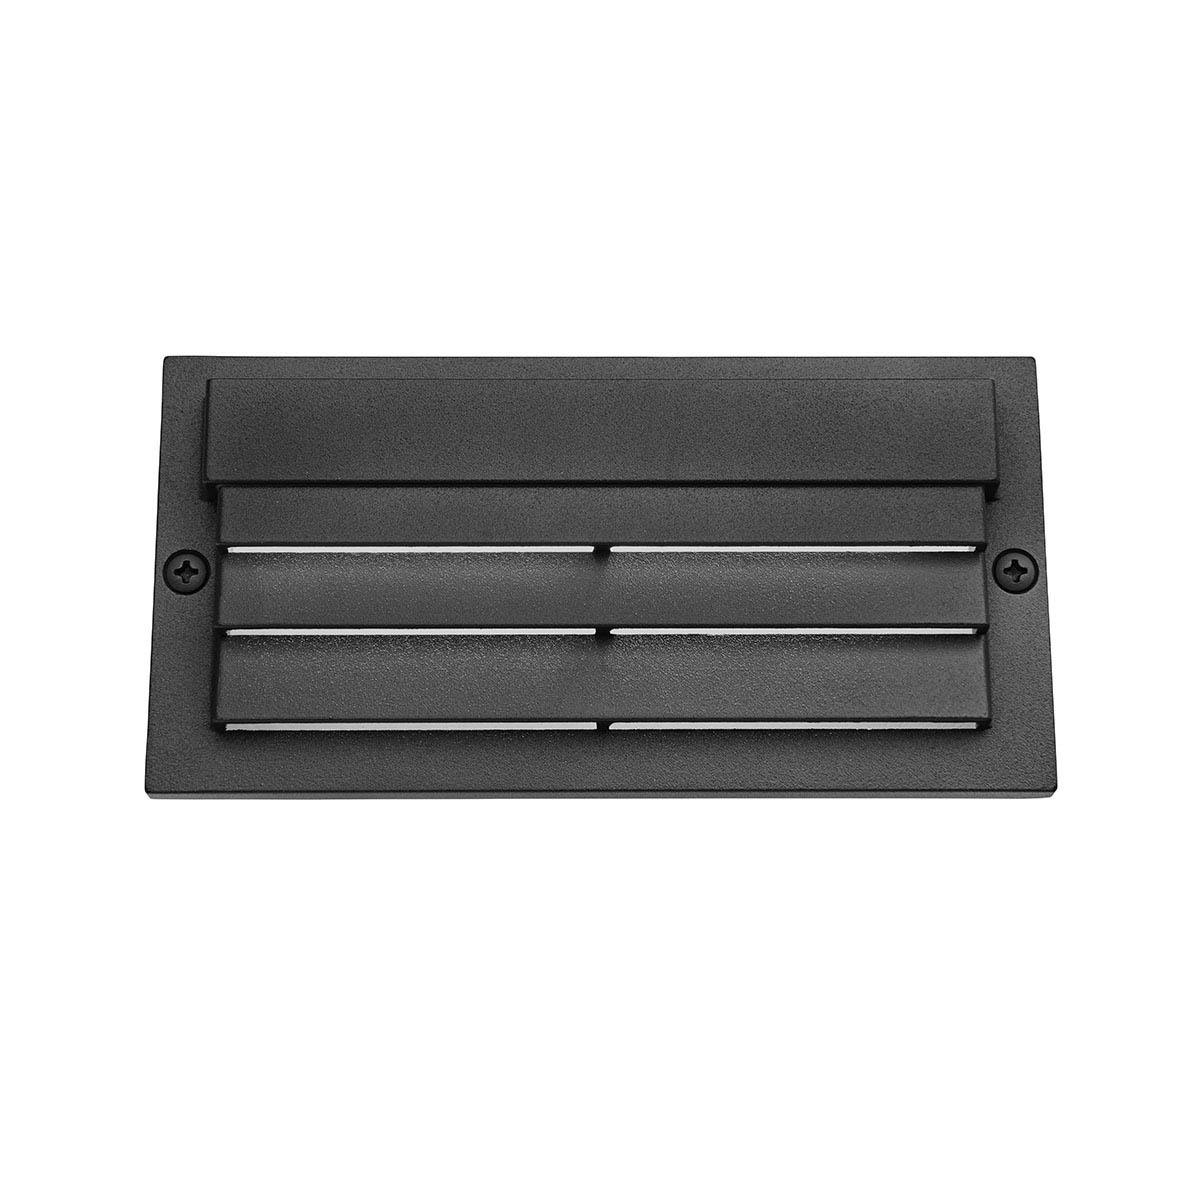 Front view of the 3000K Louvered Surface Step Light Black on a white background